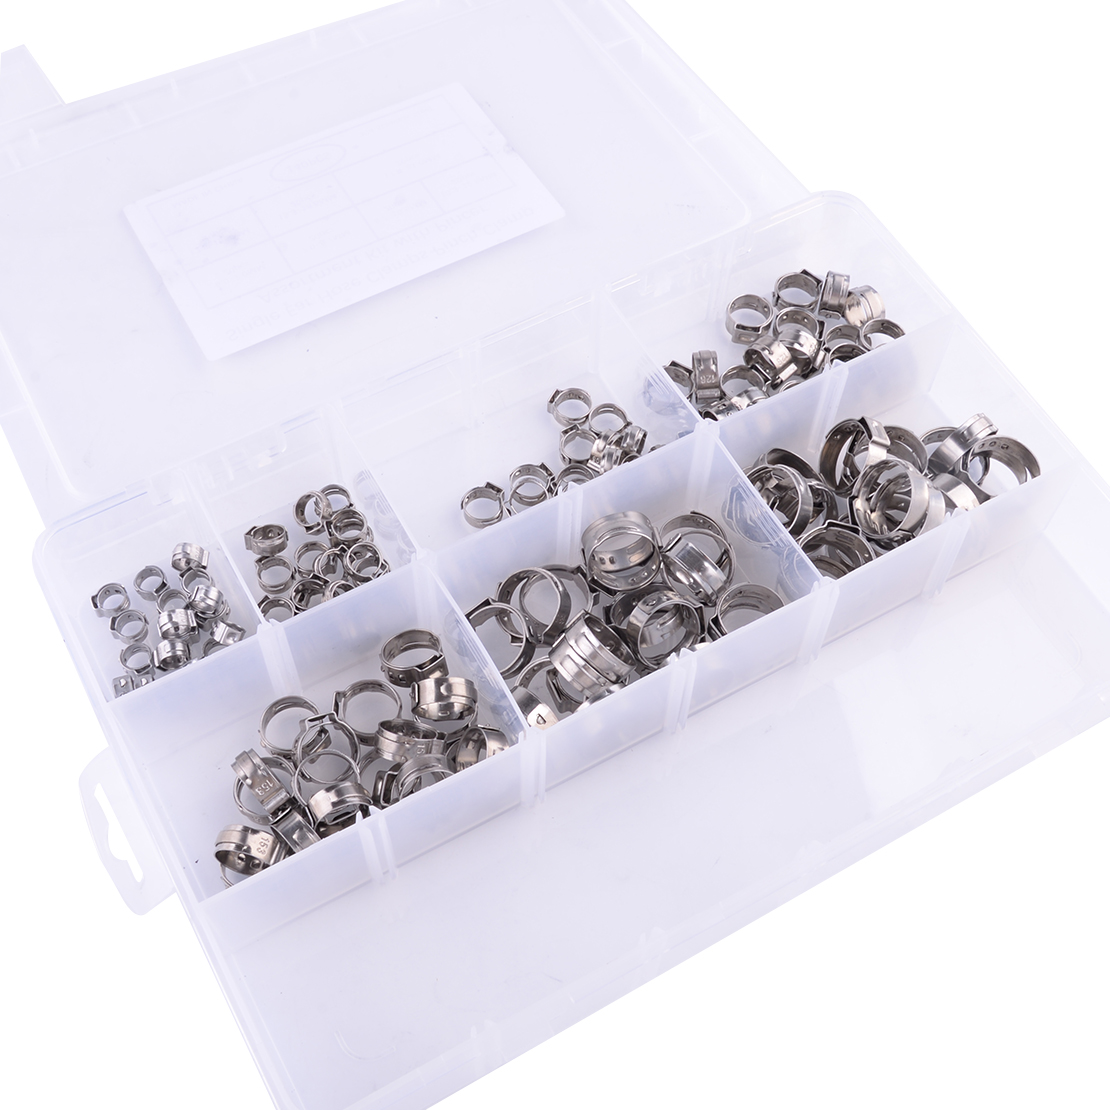 140pcs 7-21mm 304 Stainless Steel Single Ear Hose Clamps + Ear Clamp ...